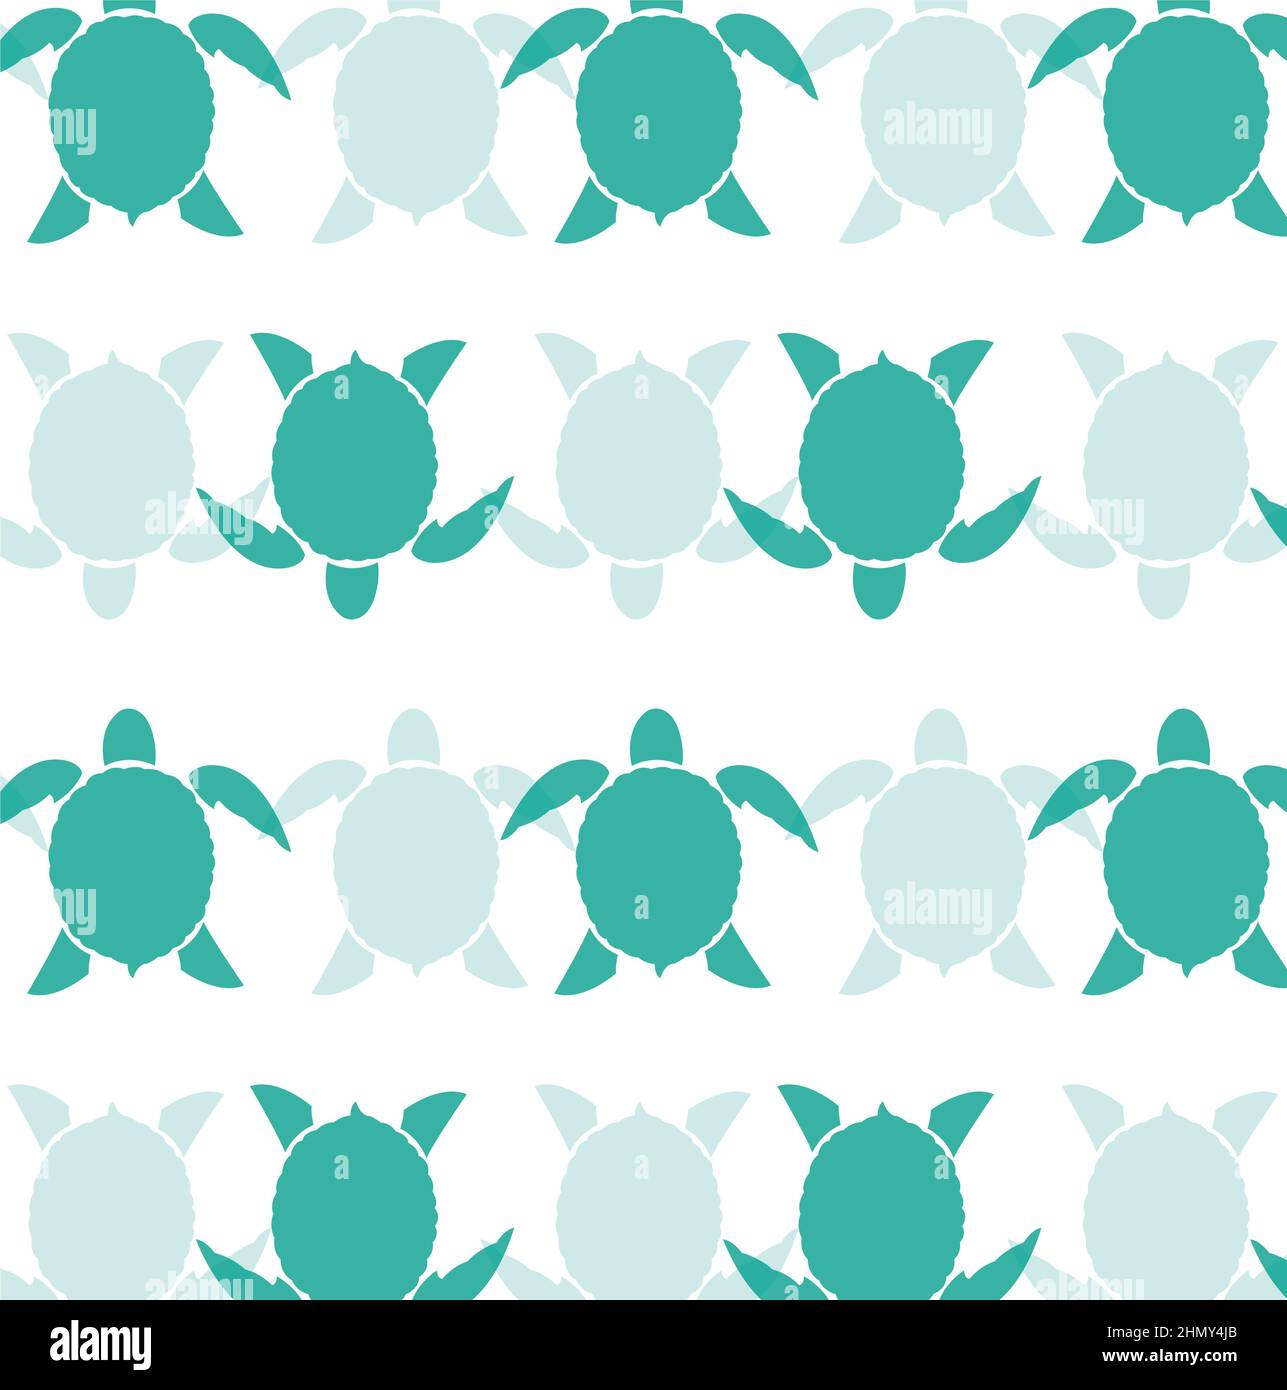 Seamless pattern with turtles. Seamless pattern can be used for wallpaper. Easy editable layered vector illustration. Stock Vector